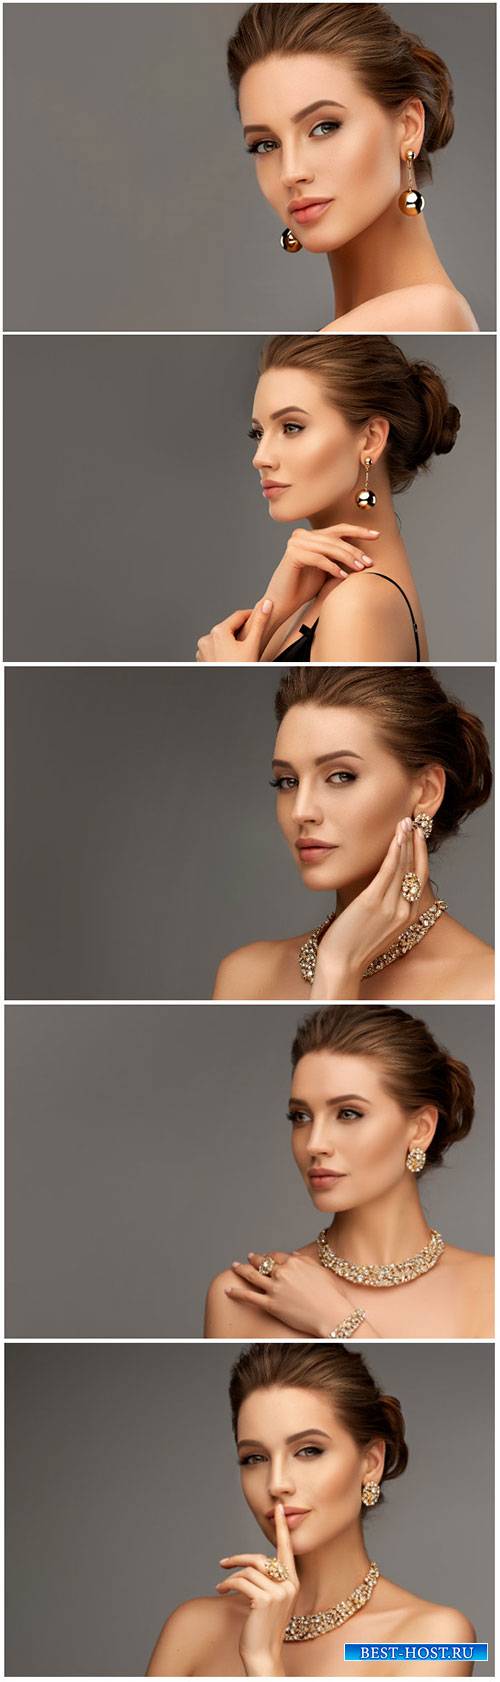 Fashionable and stylish woman in trendy jewelry big earrings